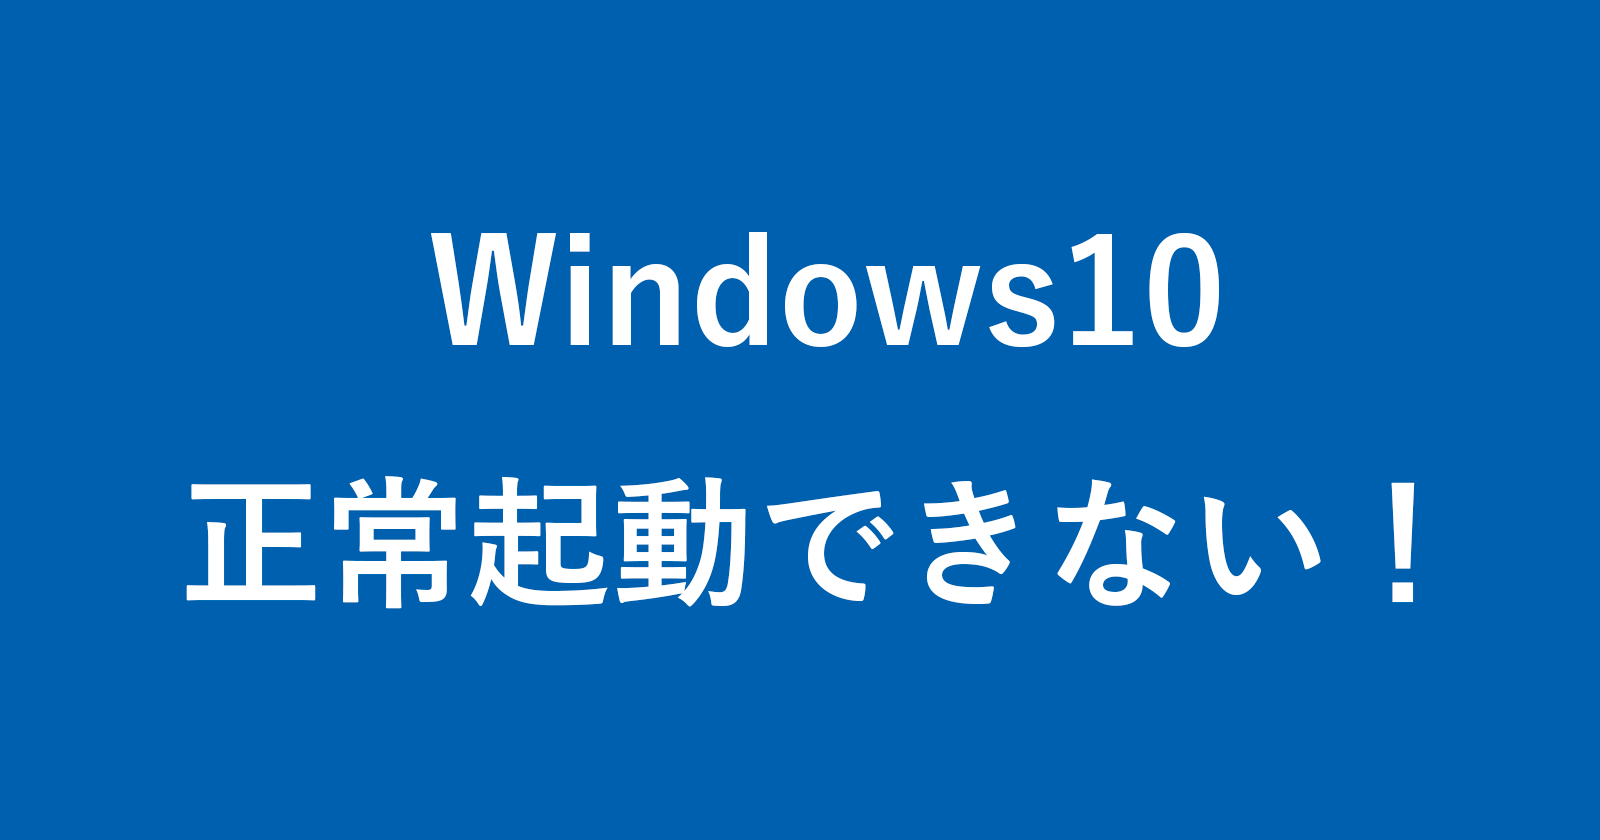 automatic repair your pc did not start correctly windows 10